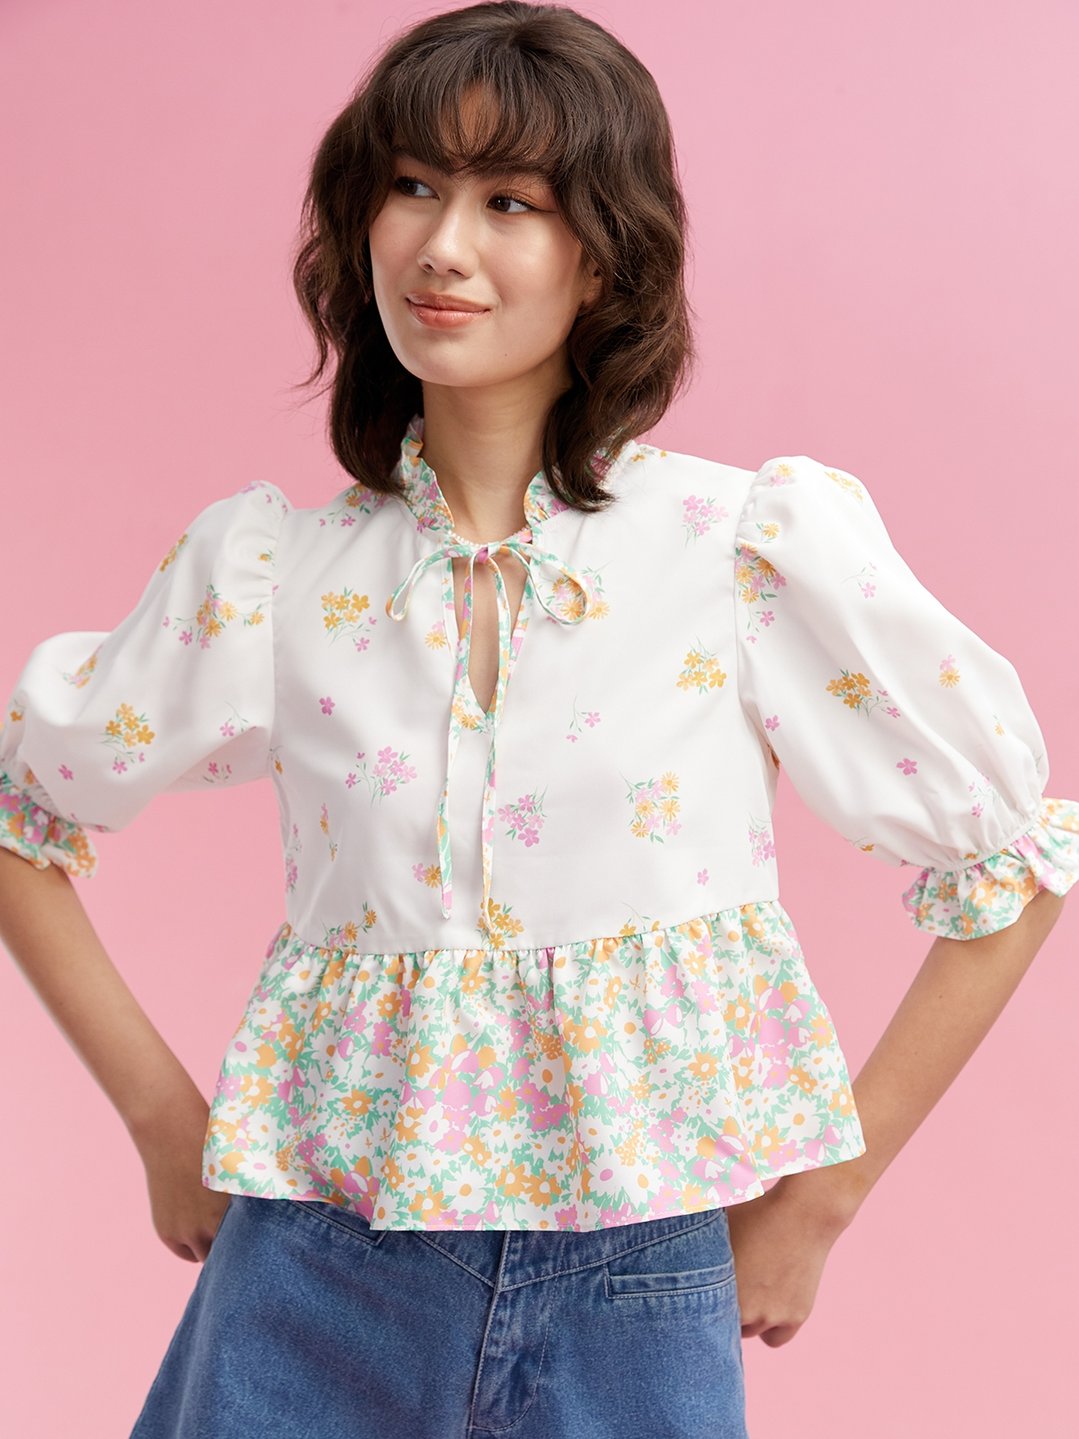 Ruffled Floral Blouse - Multi Color